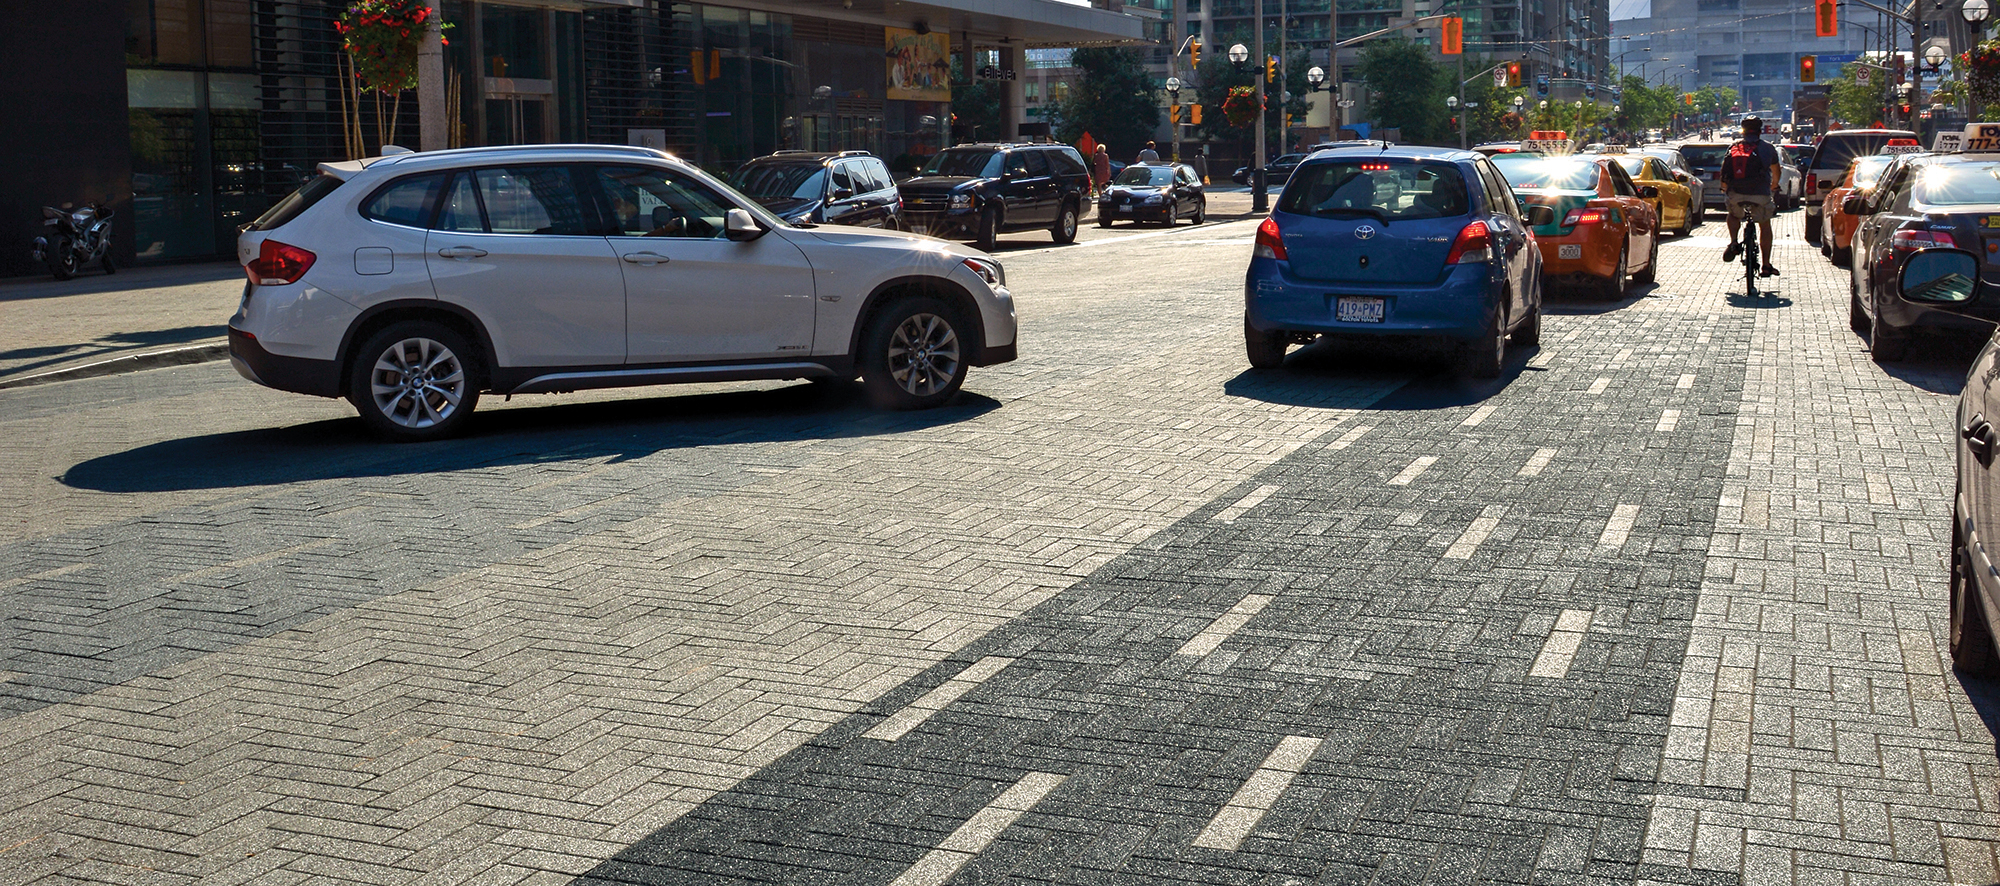 Cars and cyclists share a busy Toronto street paved with Promenade plank pavers using different colors to delineate lanes.